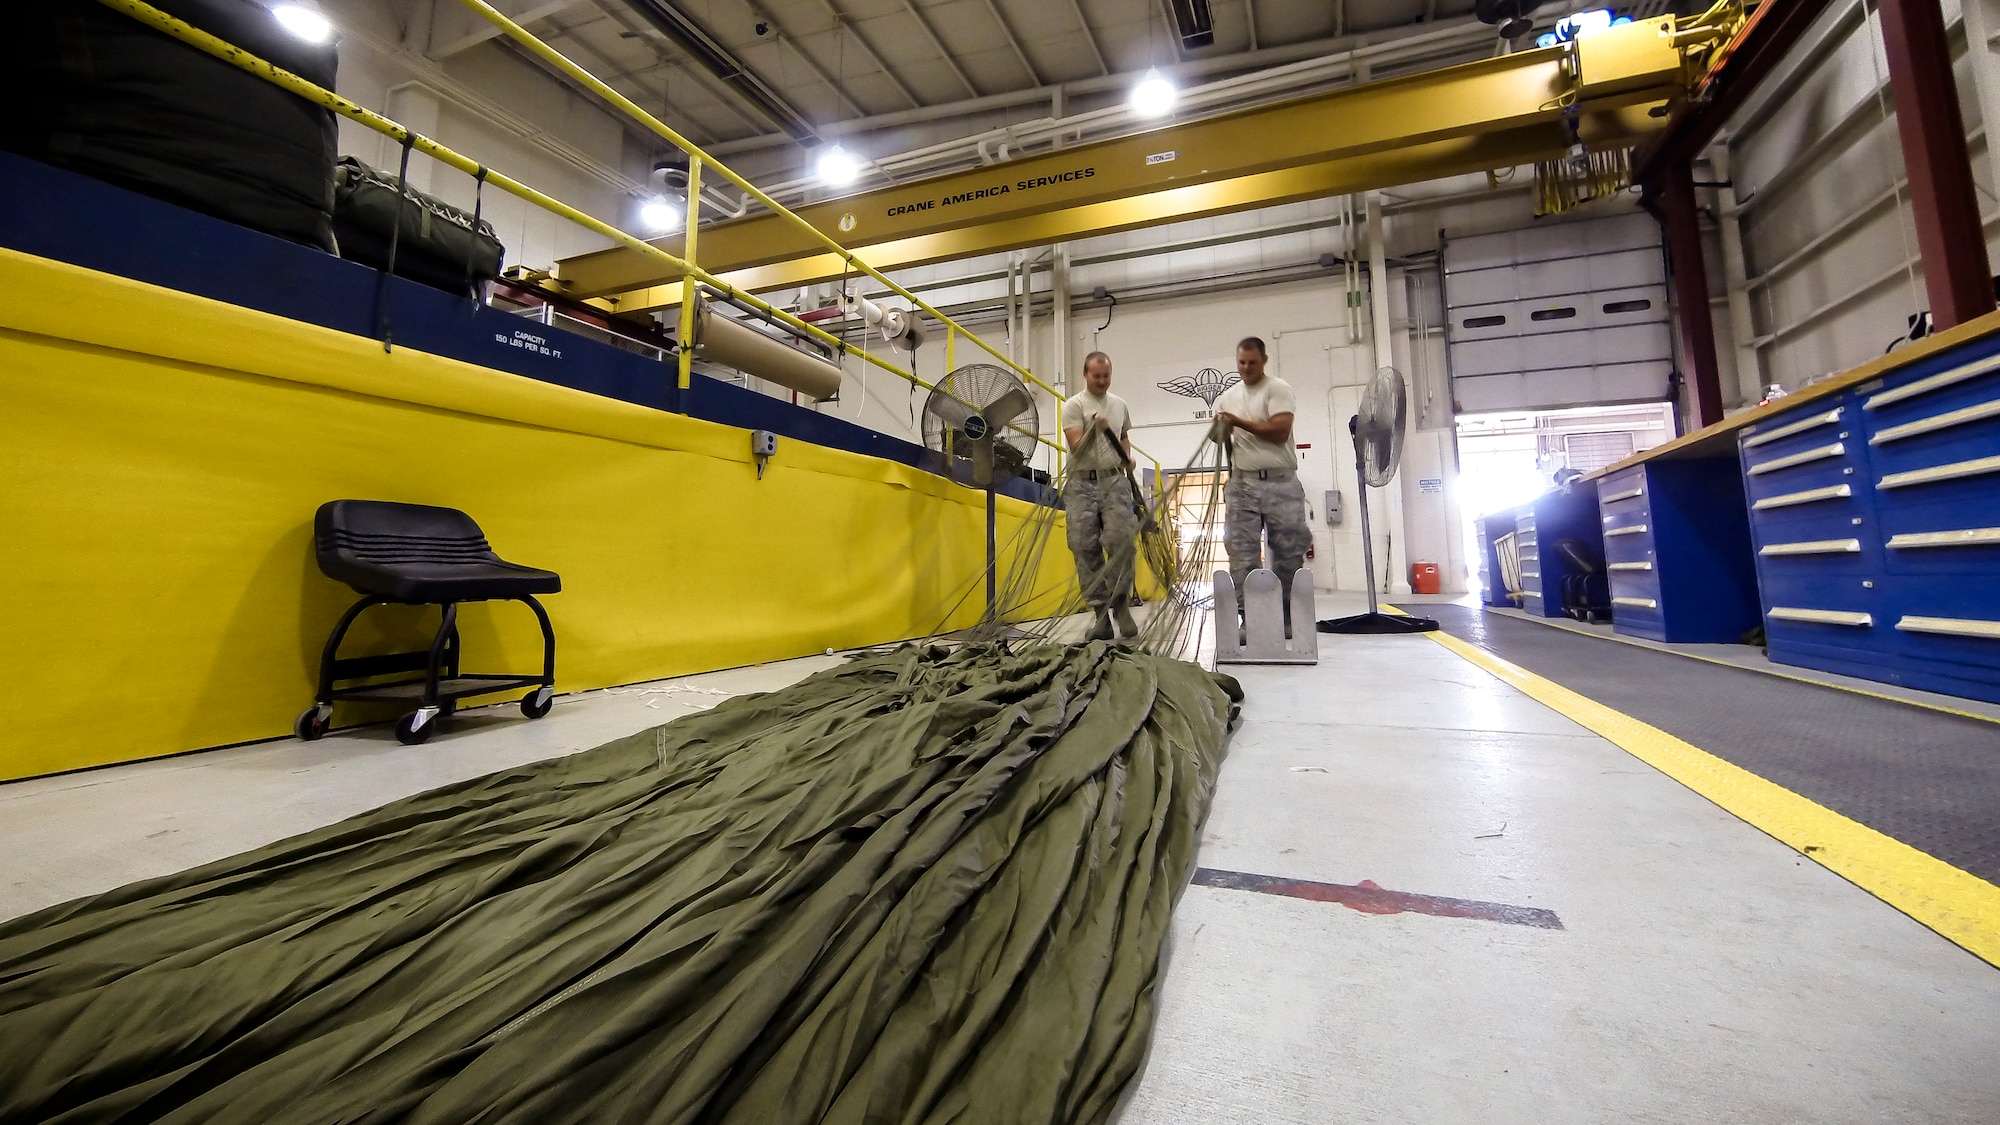 Technical Sgt. Jesse Sorrell (left) and Technical Sgt. Jeremy Martinson untagle parachute cord on a G-12E Type V platform parachute after recovering it from the dropzone on June 6, 2015. The Airman from the 182d Airlift Wing, Small Air Terminal, Peoria, Ill. check and repack the parachute after it was used in a recent C-130 air drop training mission with heavy equipment at the dropzone. (U.S. Air National Guard photo by Master Sgt. Scott Thompson/Released)